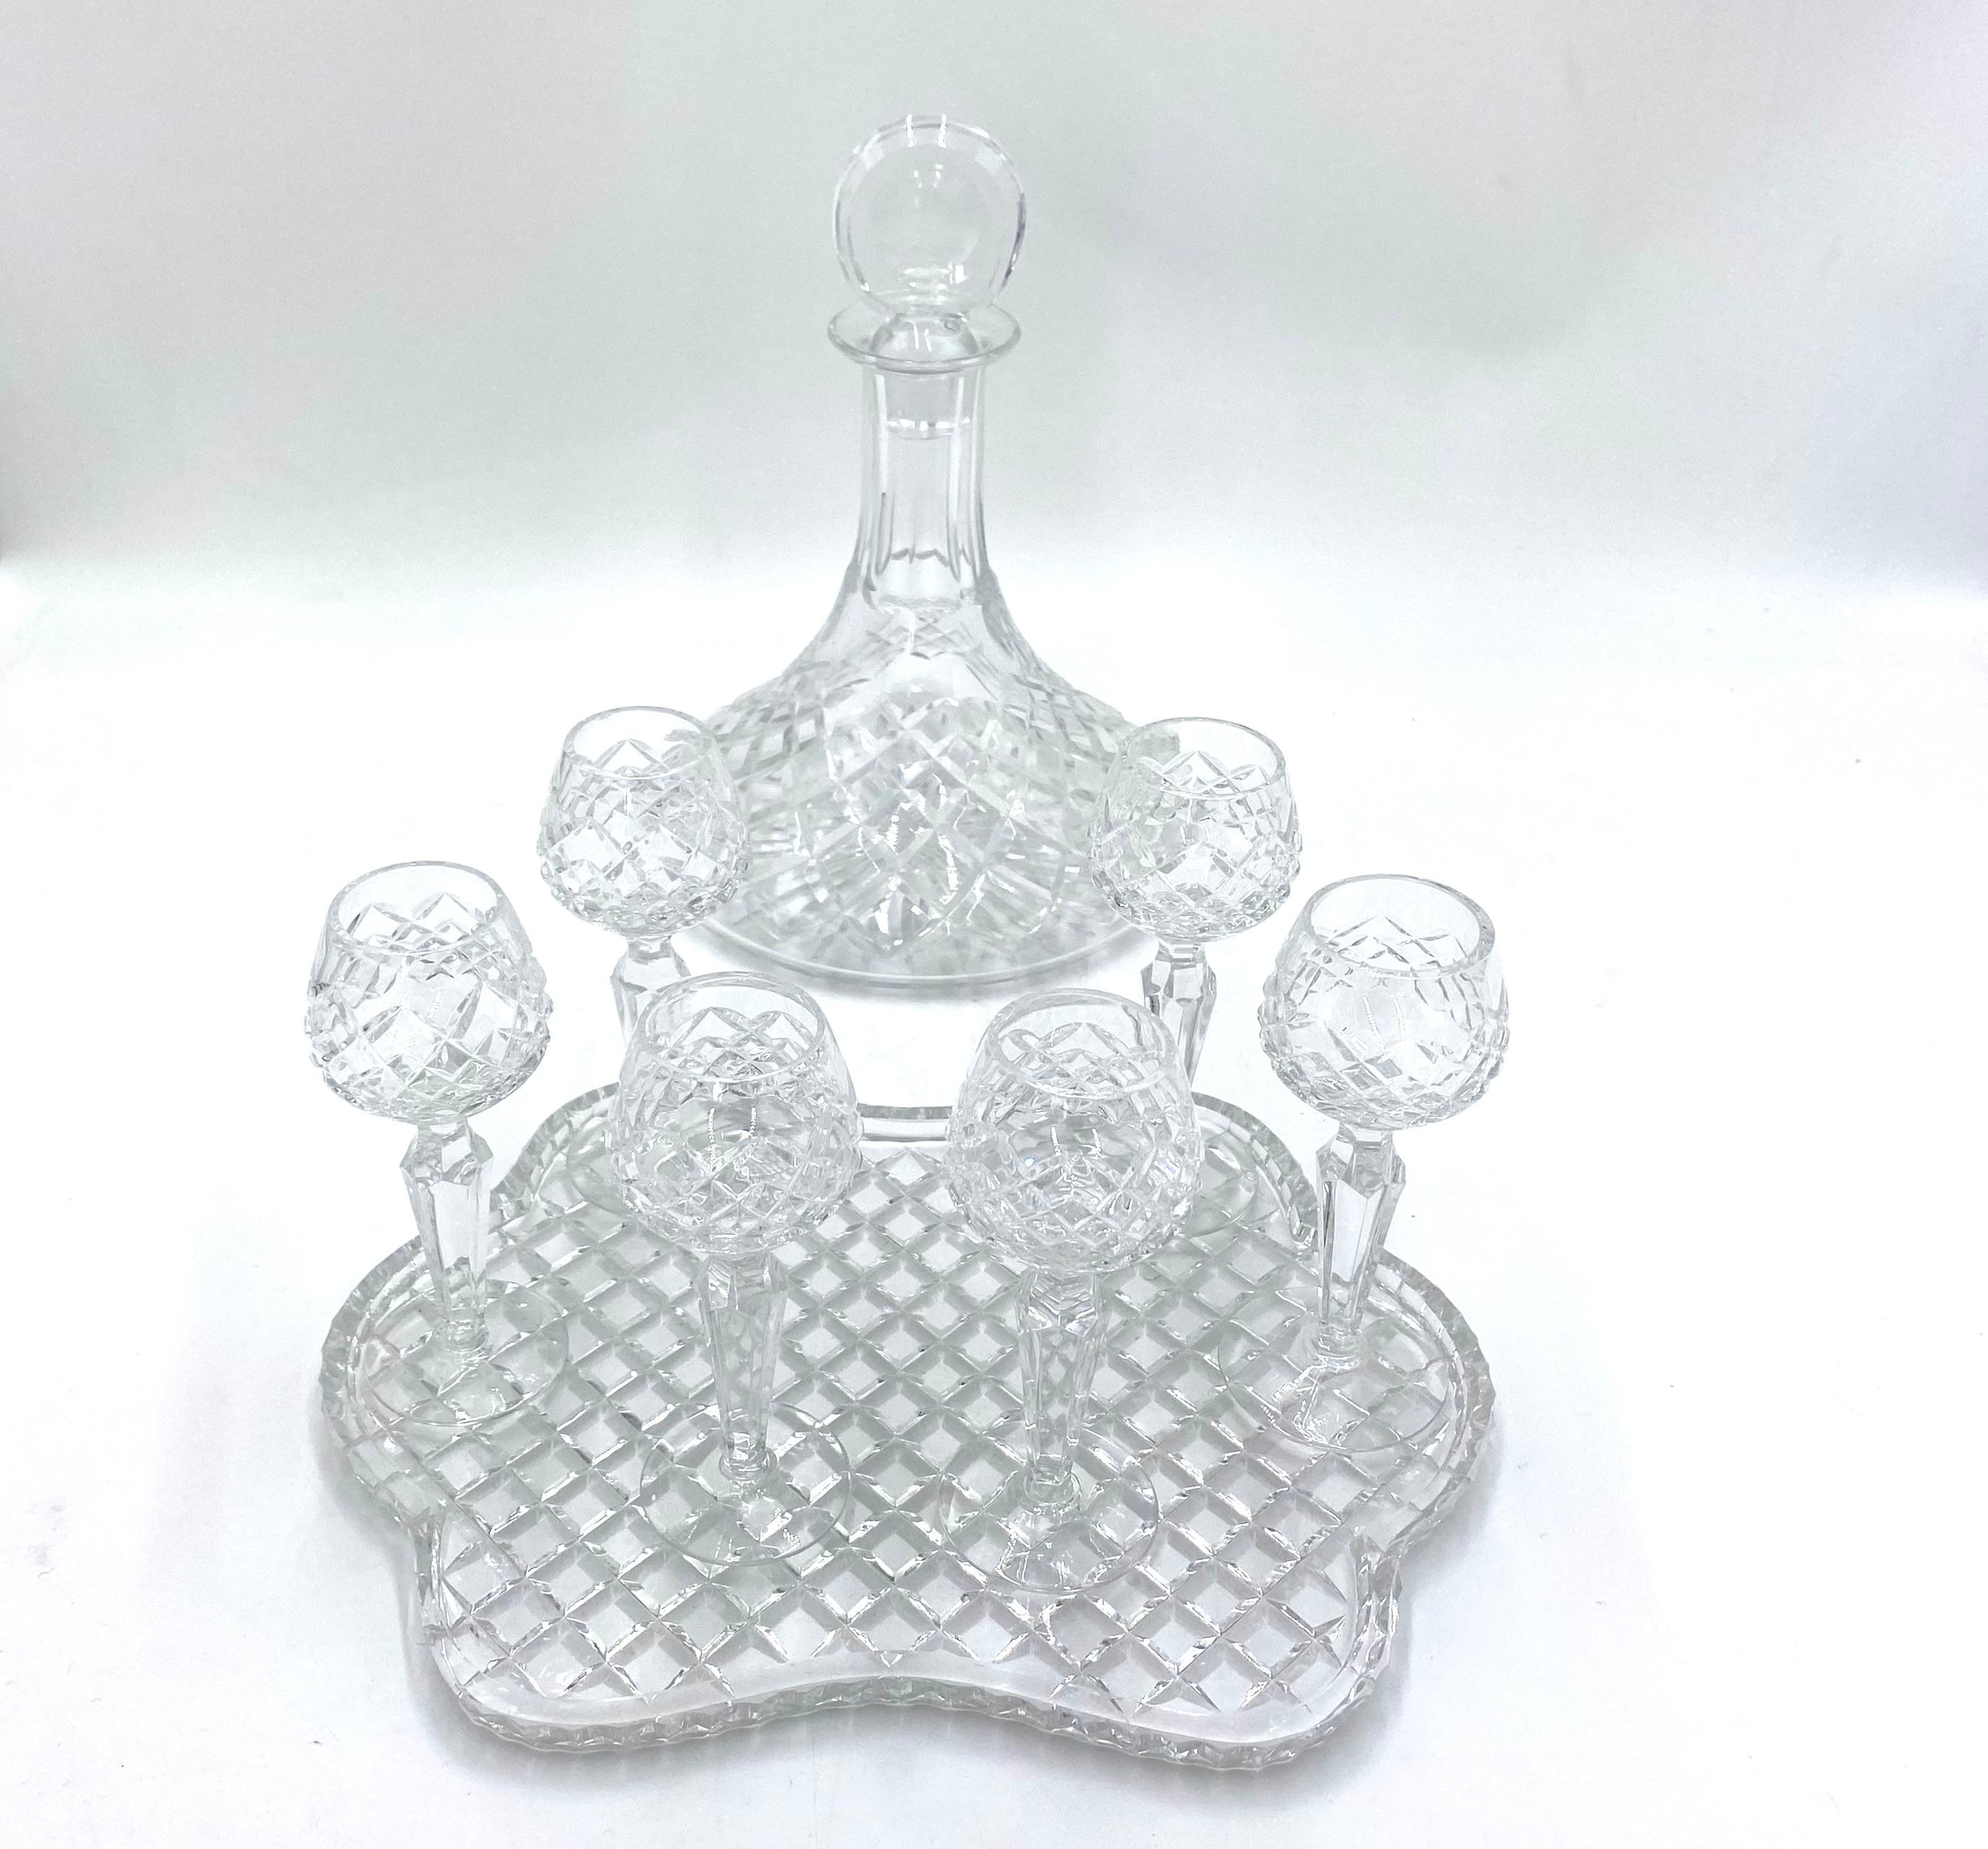 Crystal liqueur set consisting of a decanter with stopper, 6 liqueur glasses and a tray

Made of colorless crystal

The set was made in Poland in the middle of the 20th century

Very good condition

carafe: height 26cm, diameter